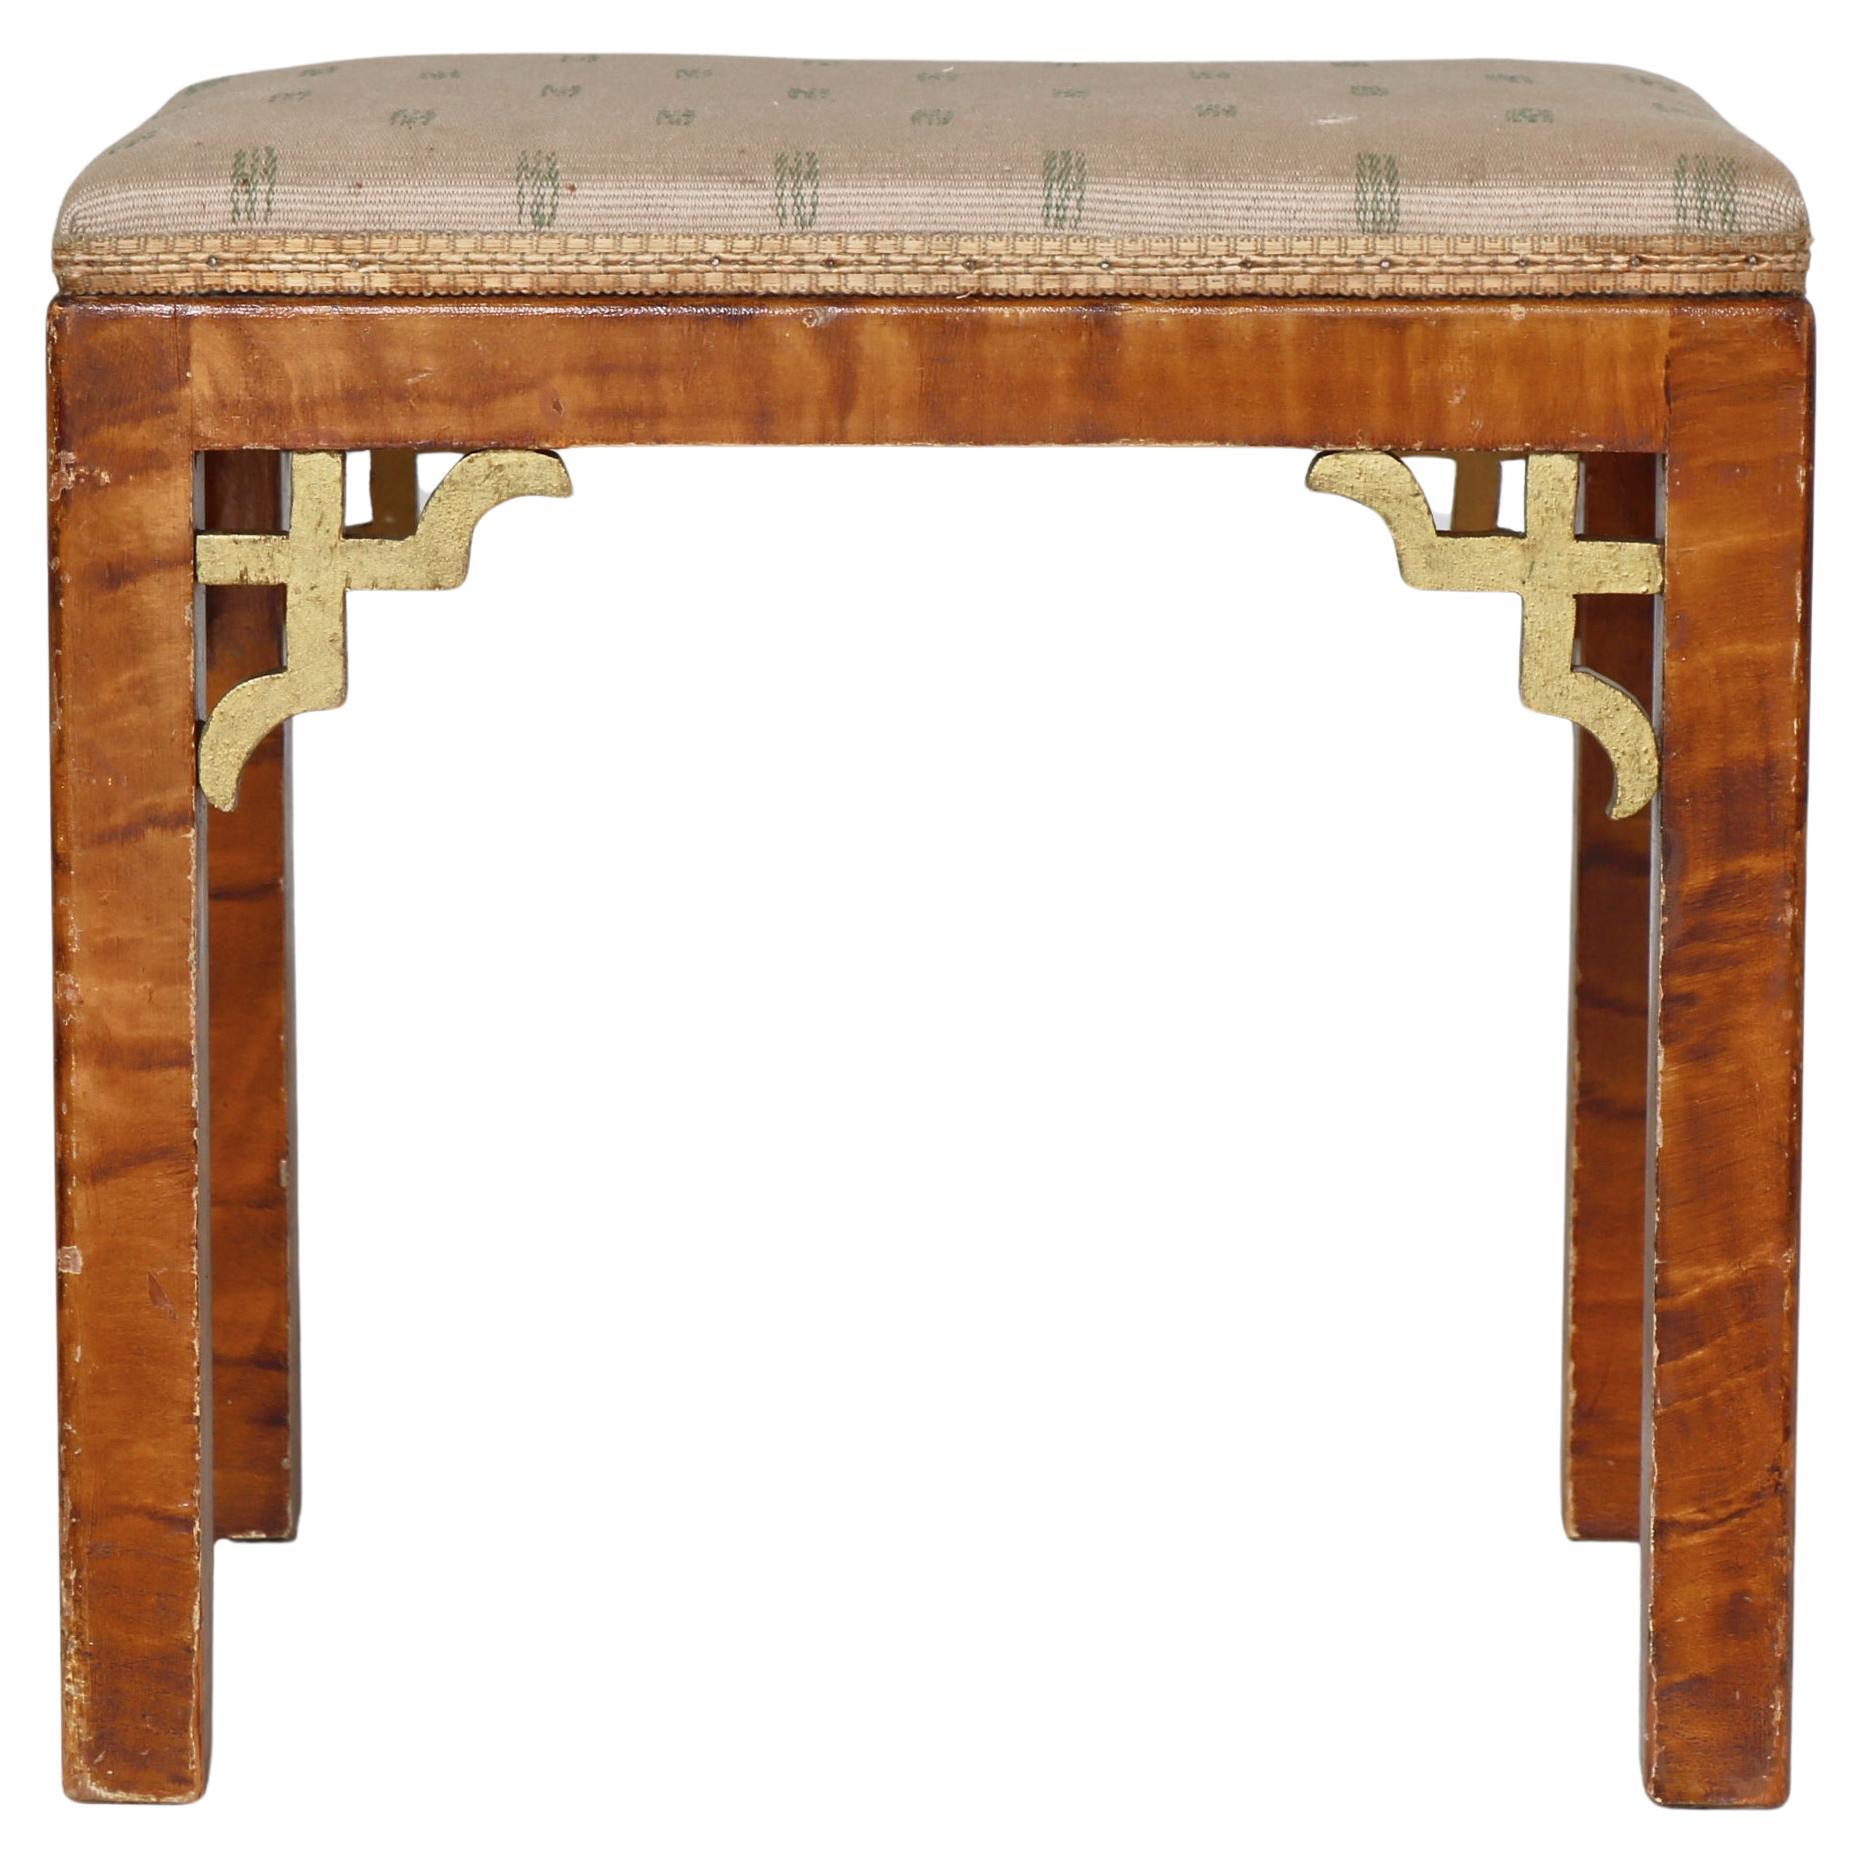 Scandinavian Art Deco Stool Chinoiserie Style in Original Upholstery, 1920s For Sale